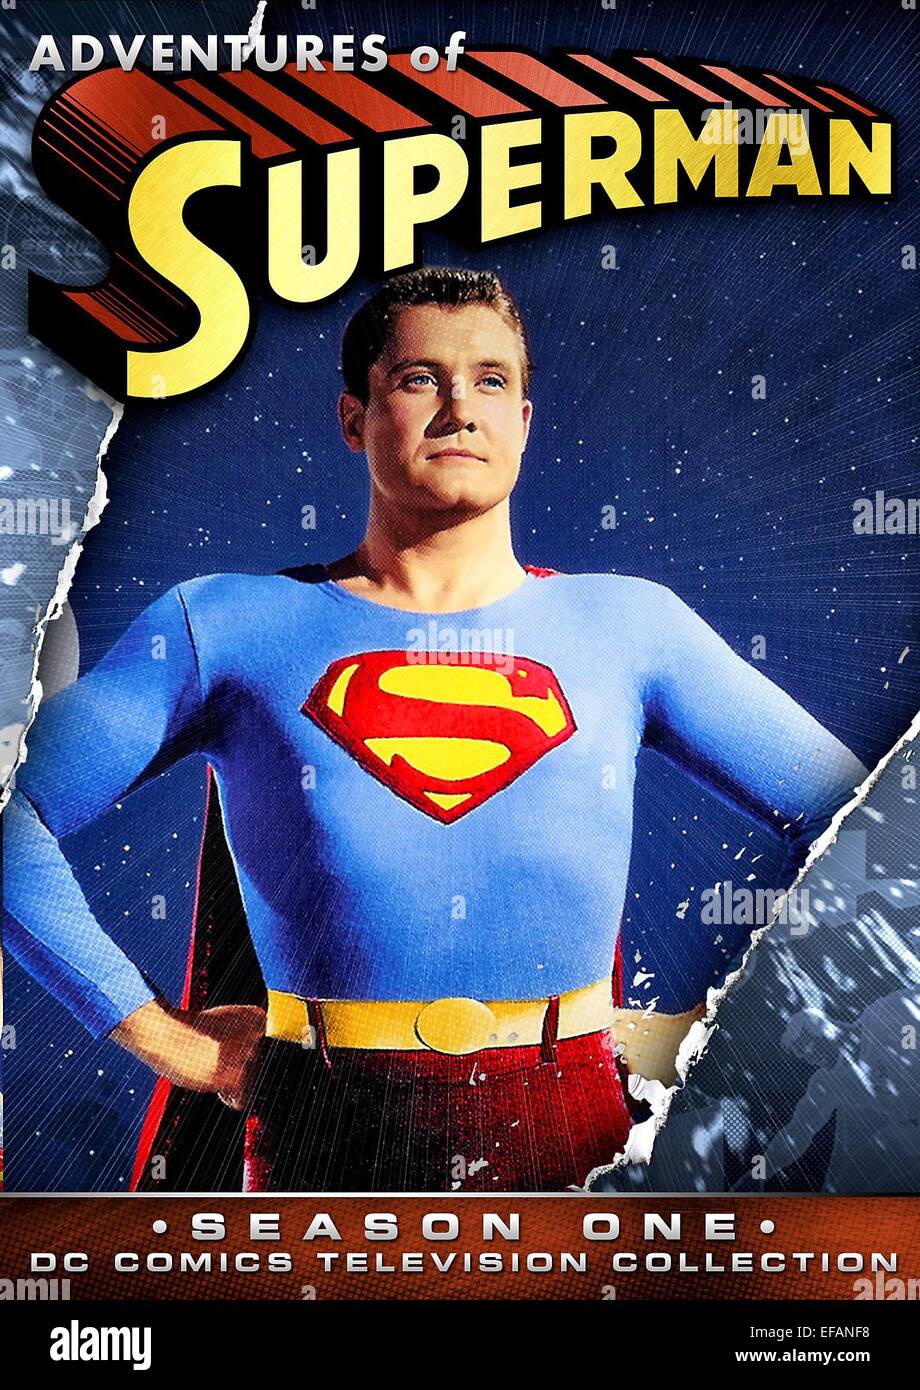 George reeves superman stock images - Alamy